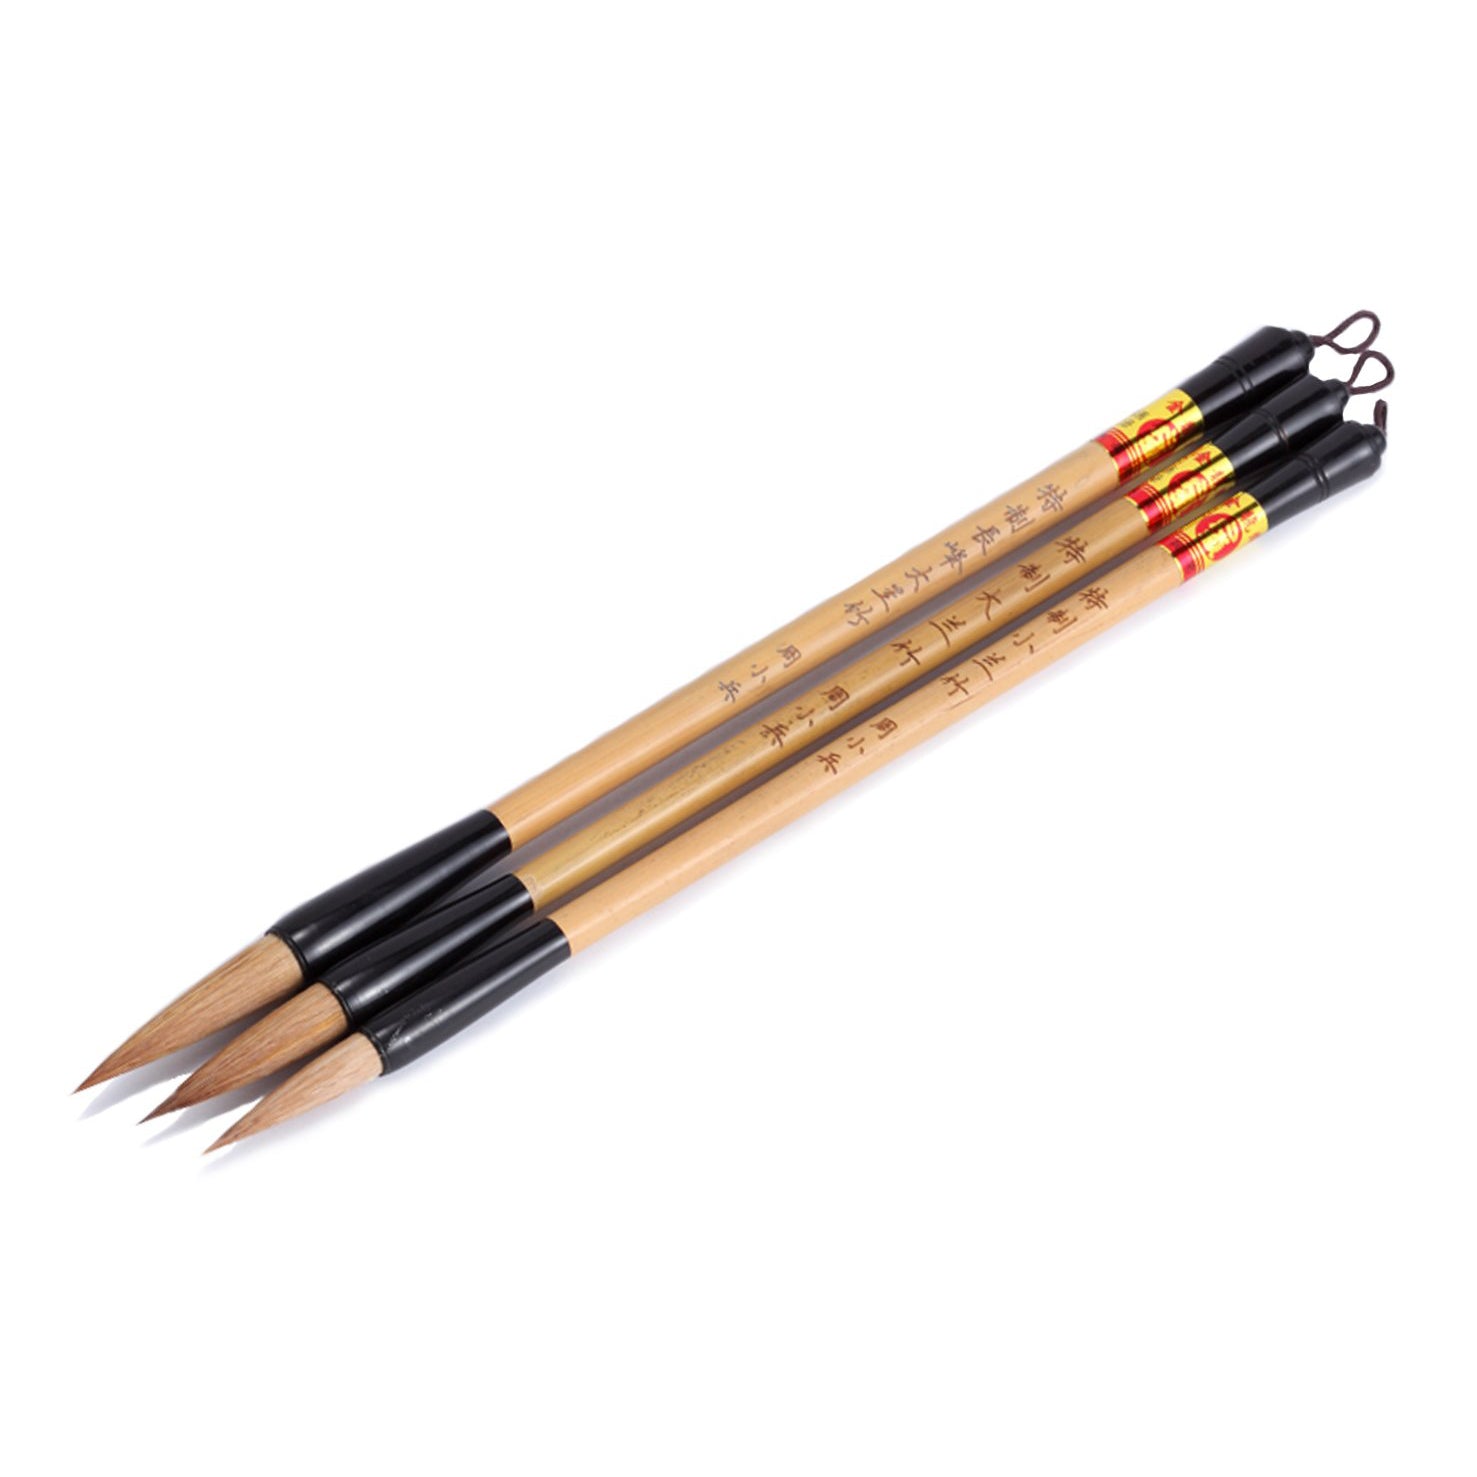 having three different tip sizes, this "Great Master Orchid and Bamboo Brush" could fulfill your needs in painting lines of different thickness or effects